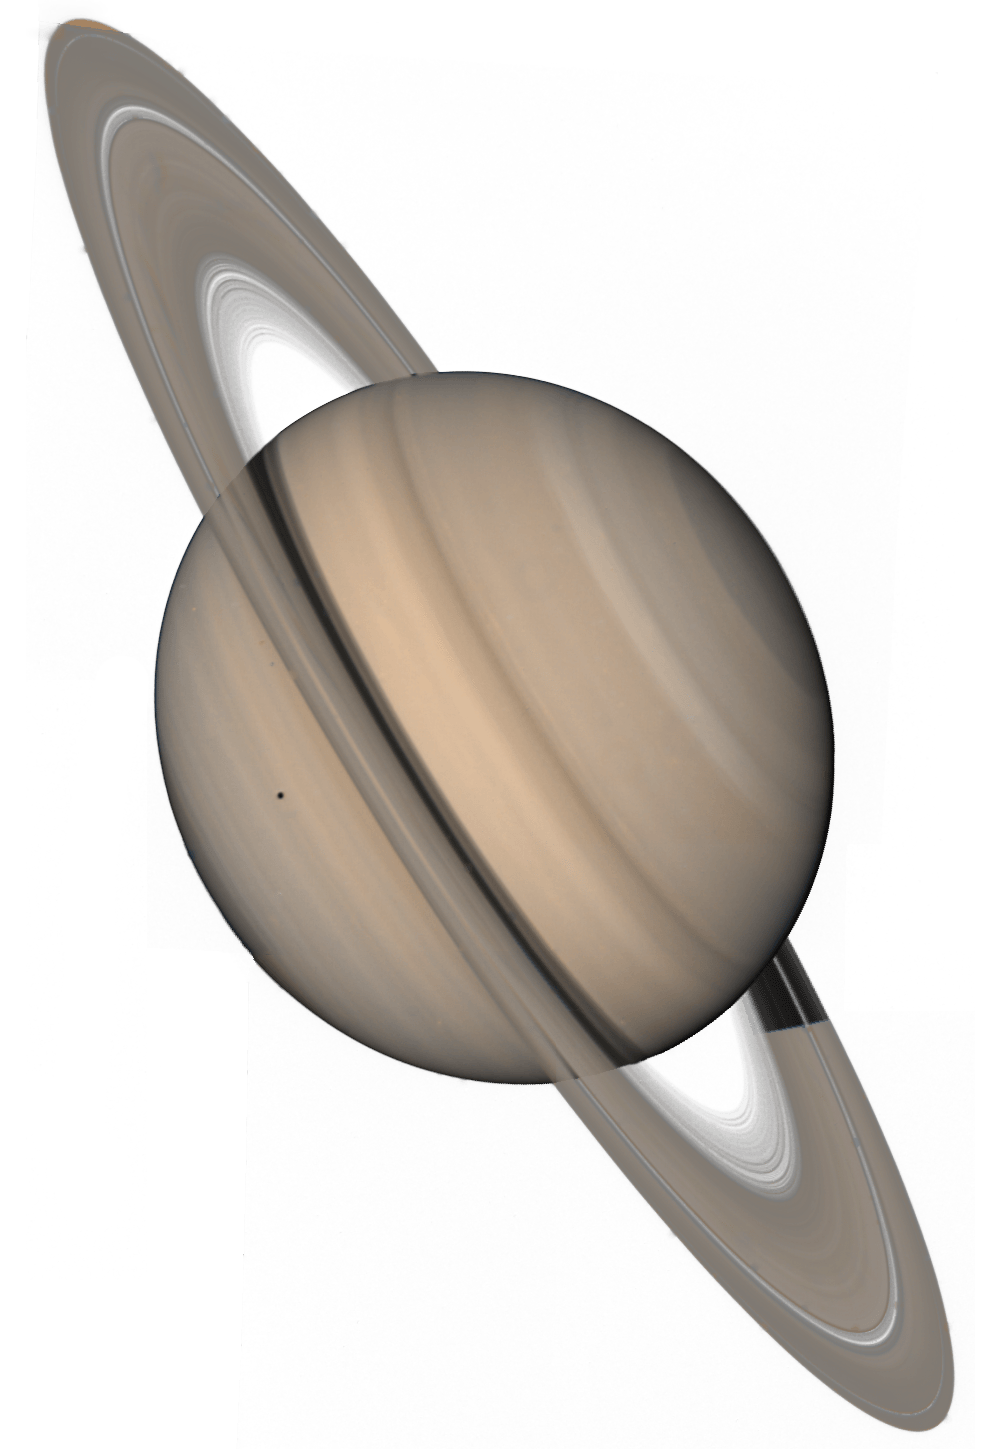 Planet Saturn associated with the numerology of 26